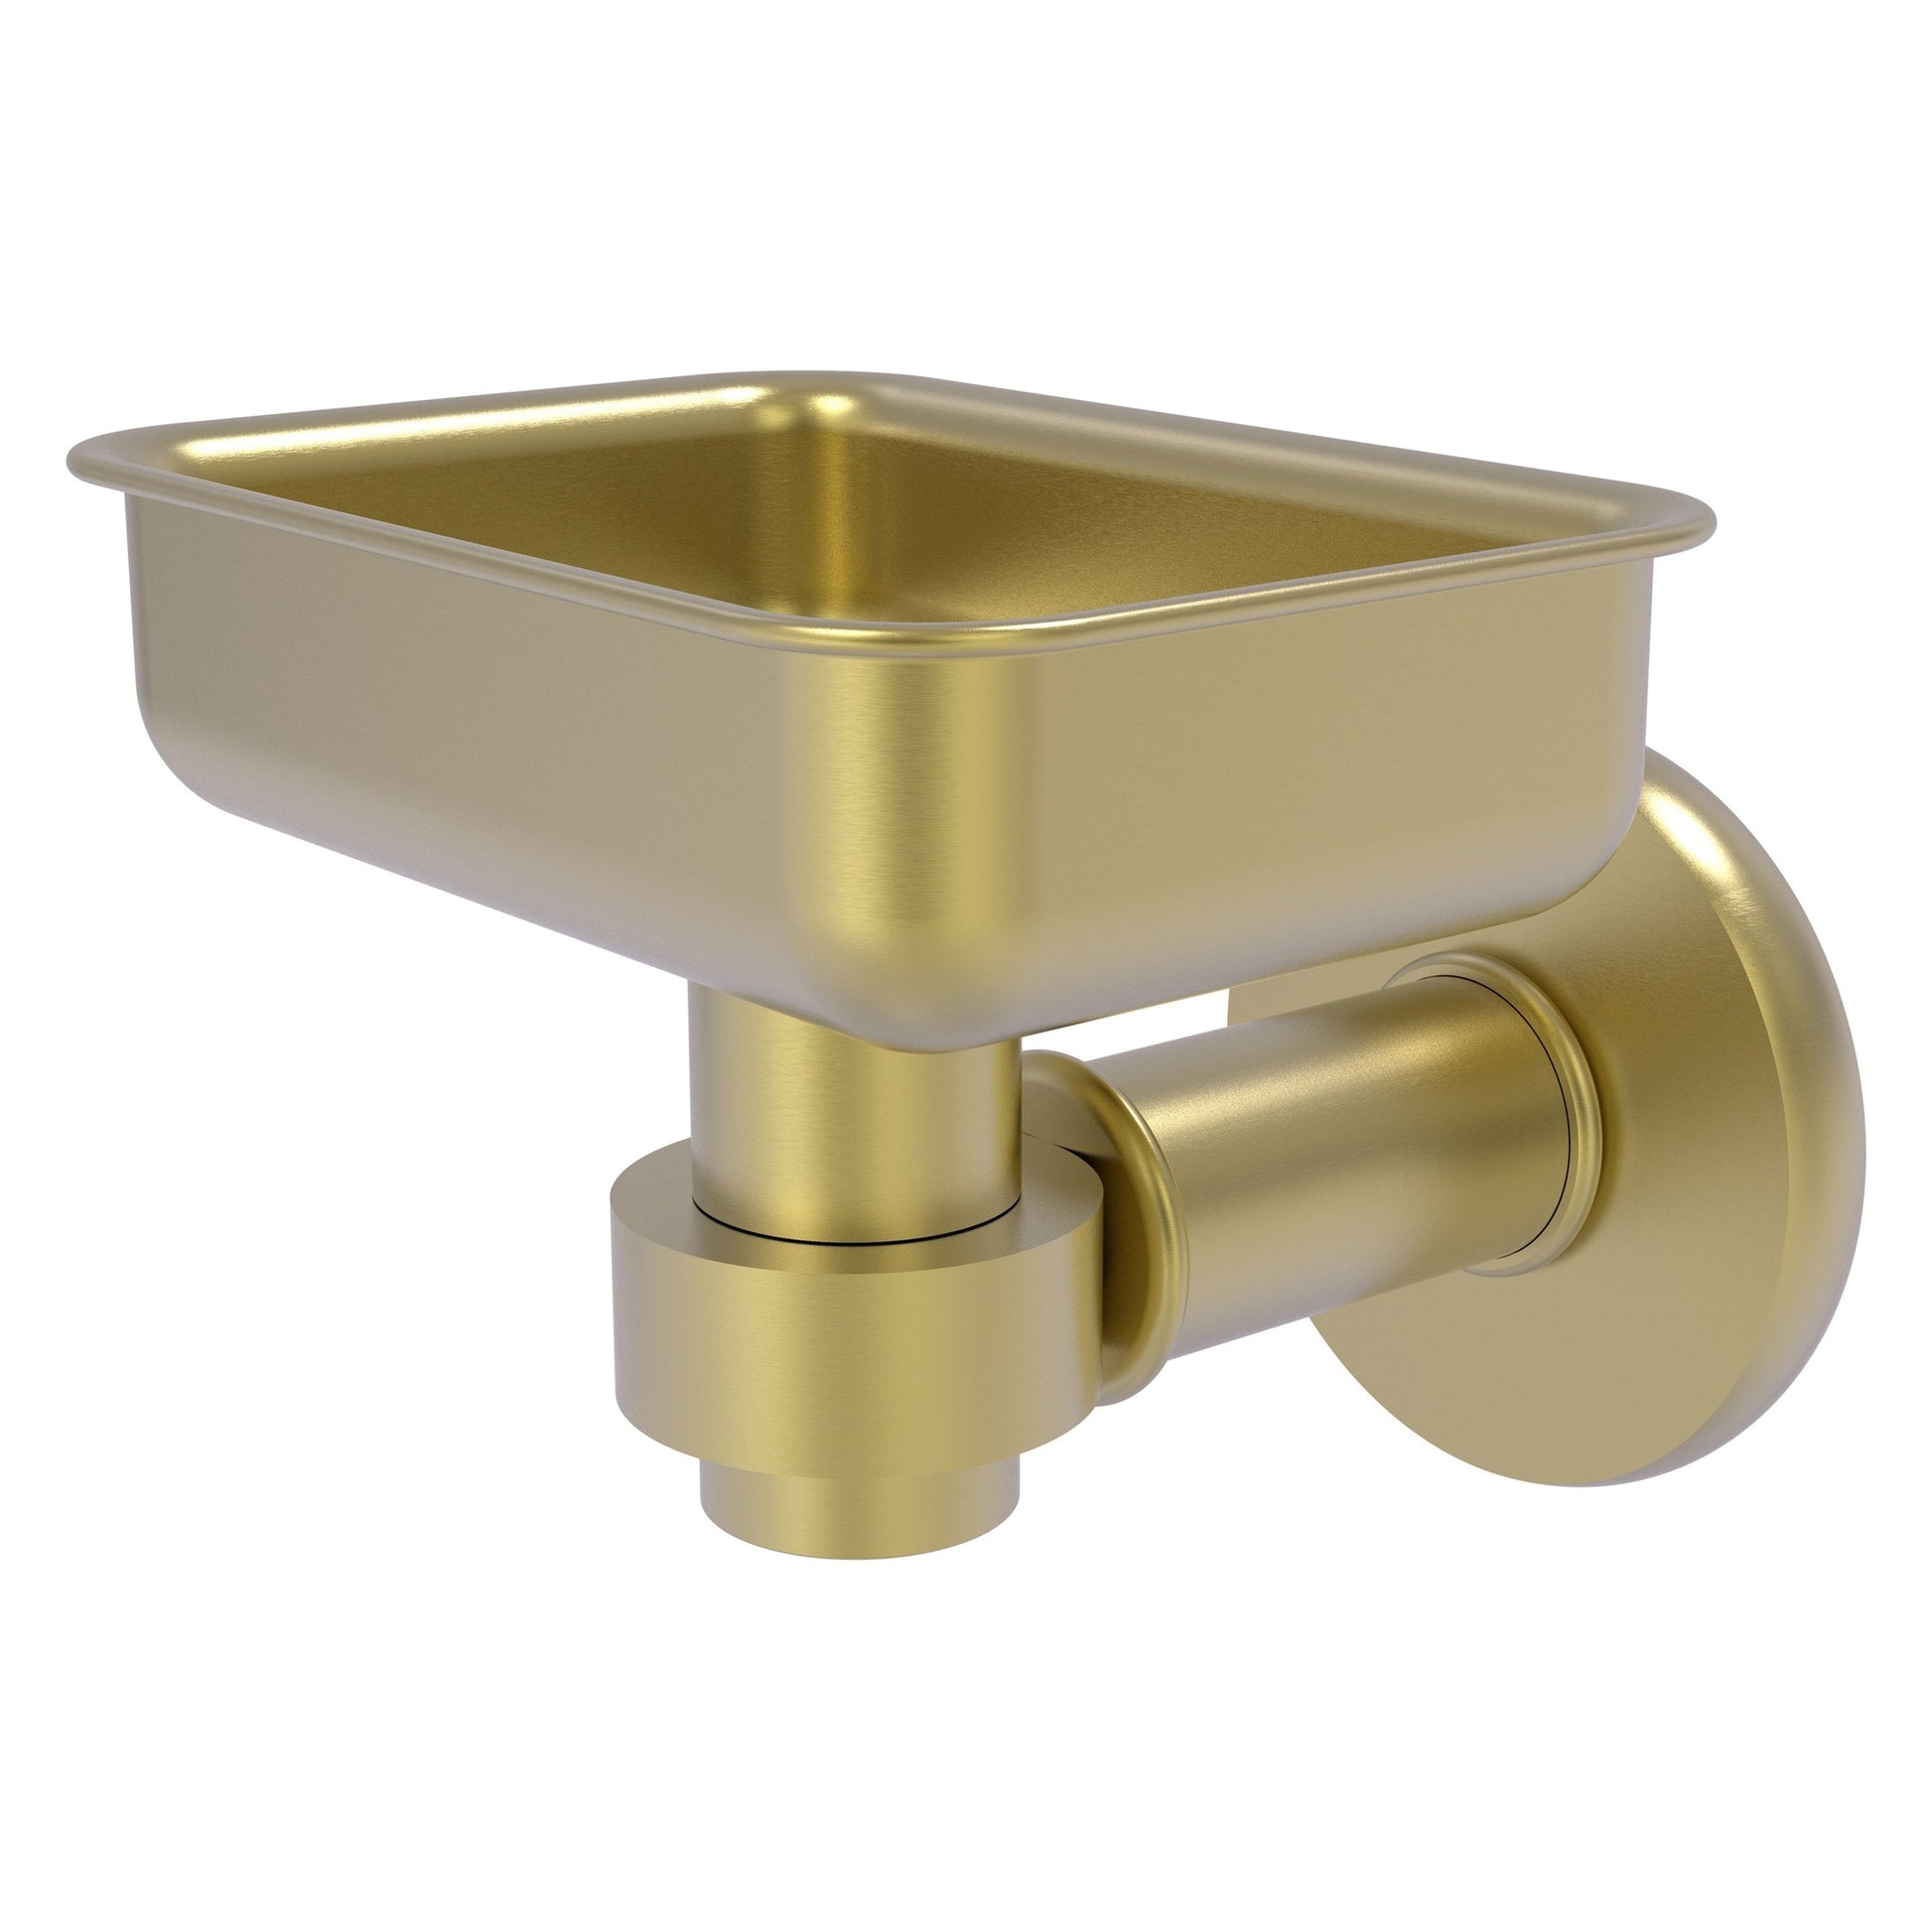 Allied Brass Continental 4.5" x 3.5" Satin Brass Solid Brass Wall-Mounted Soap Dish Holder